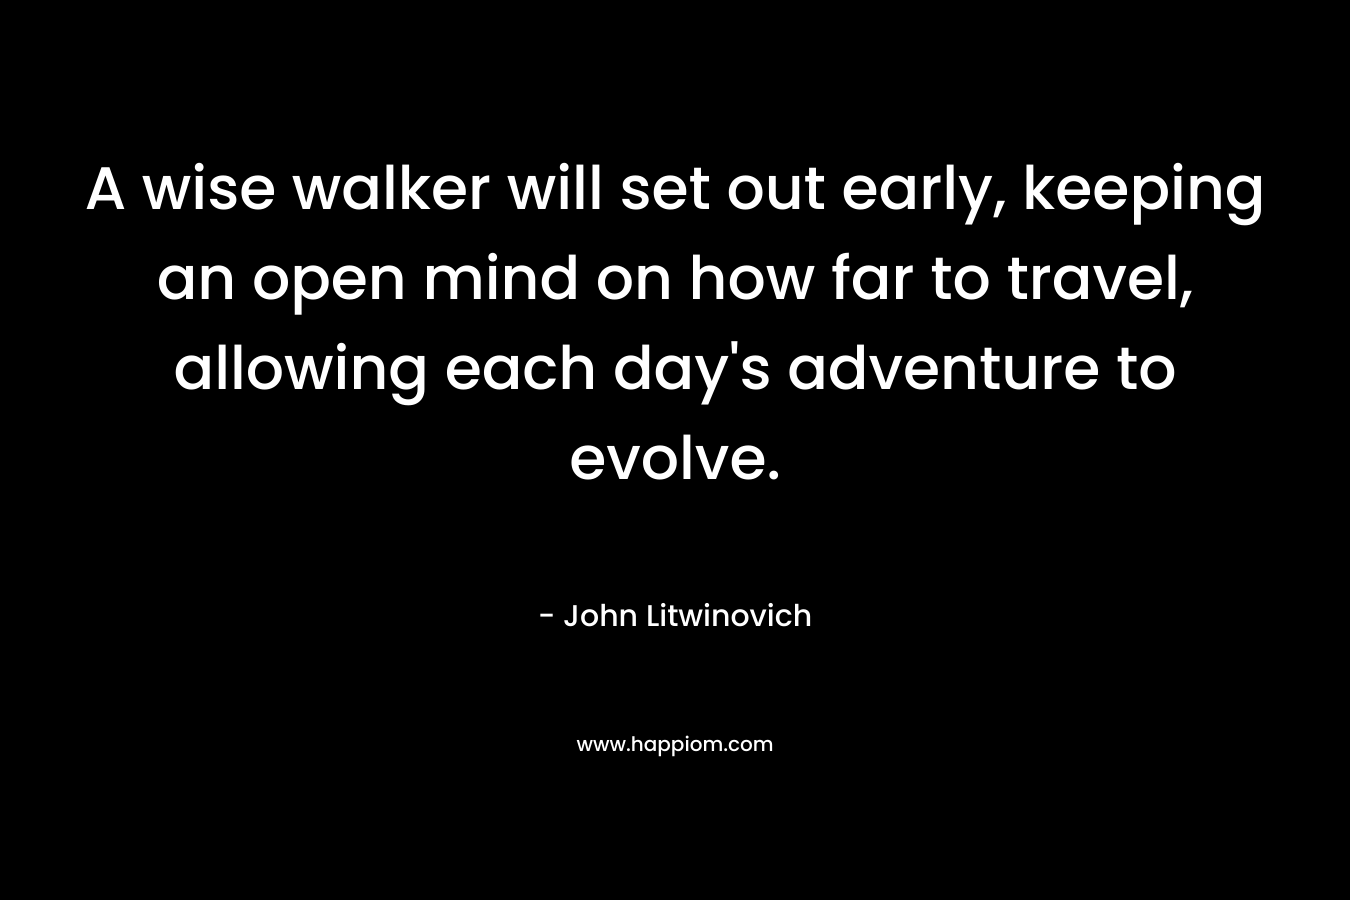 A wise walker will set out early, keeping an open mind on how far to travel, allowing each day's adventure to evolve.